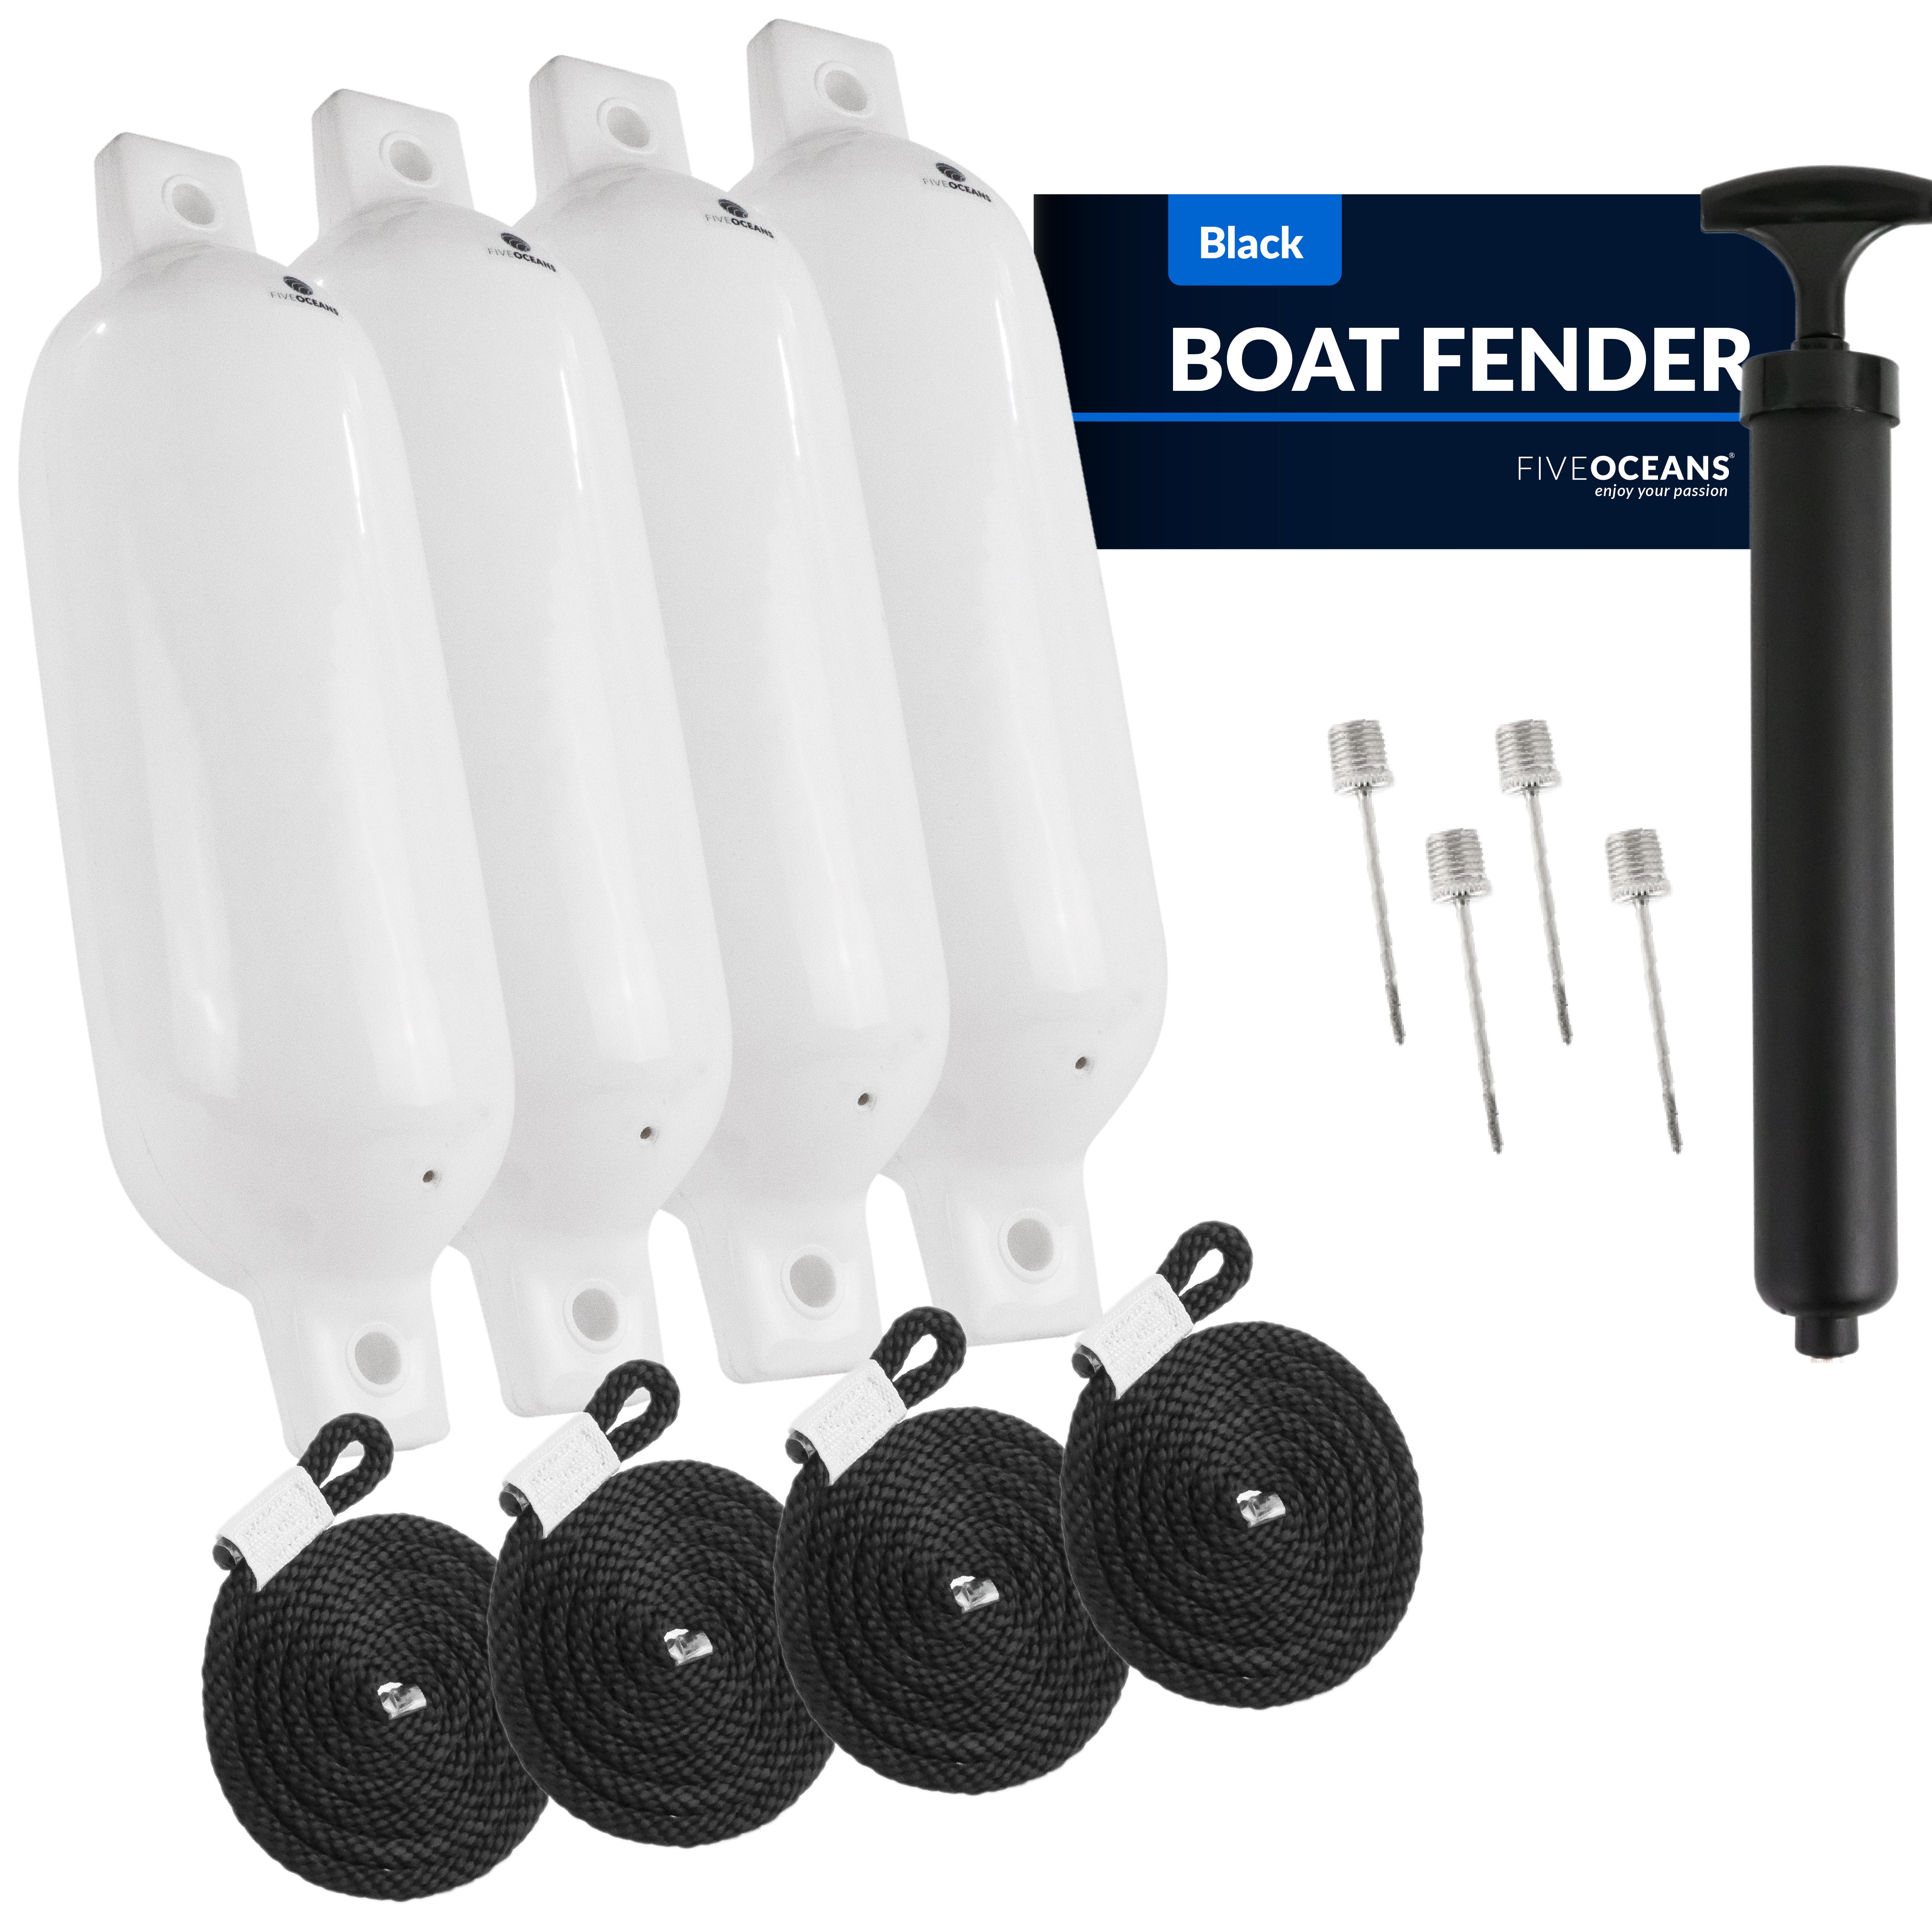 white boat fenders bumpers for docking 4 pack